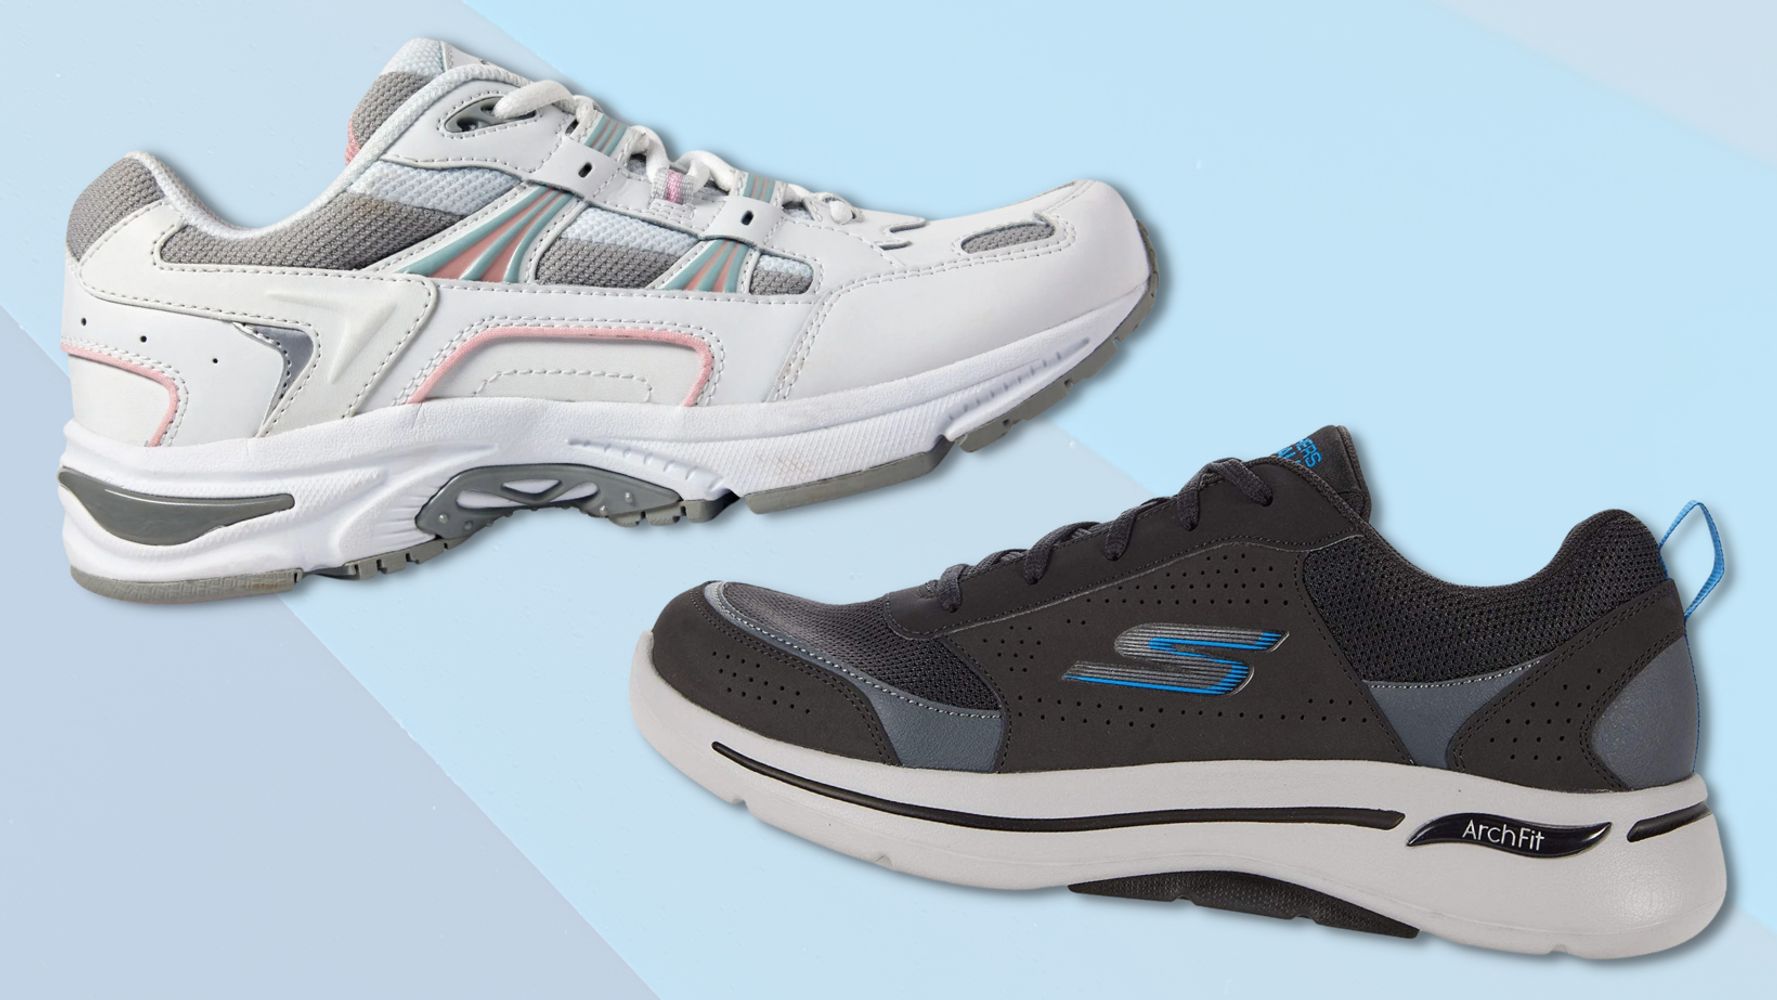 Best Tennis Shoes for Men: Avoid Foot Faults With This Guide